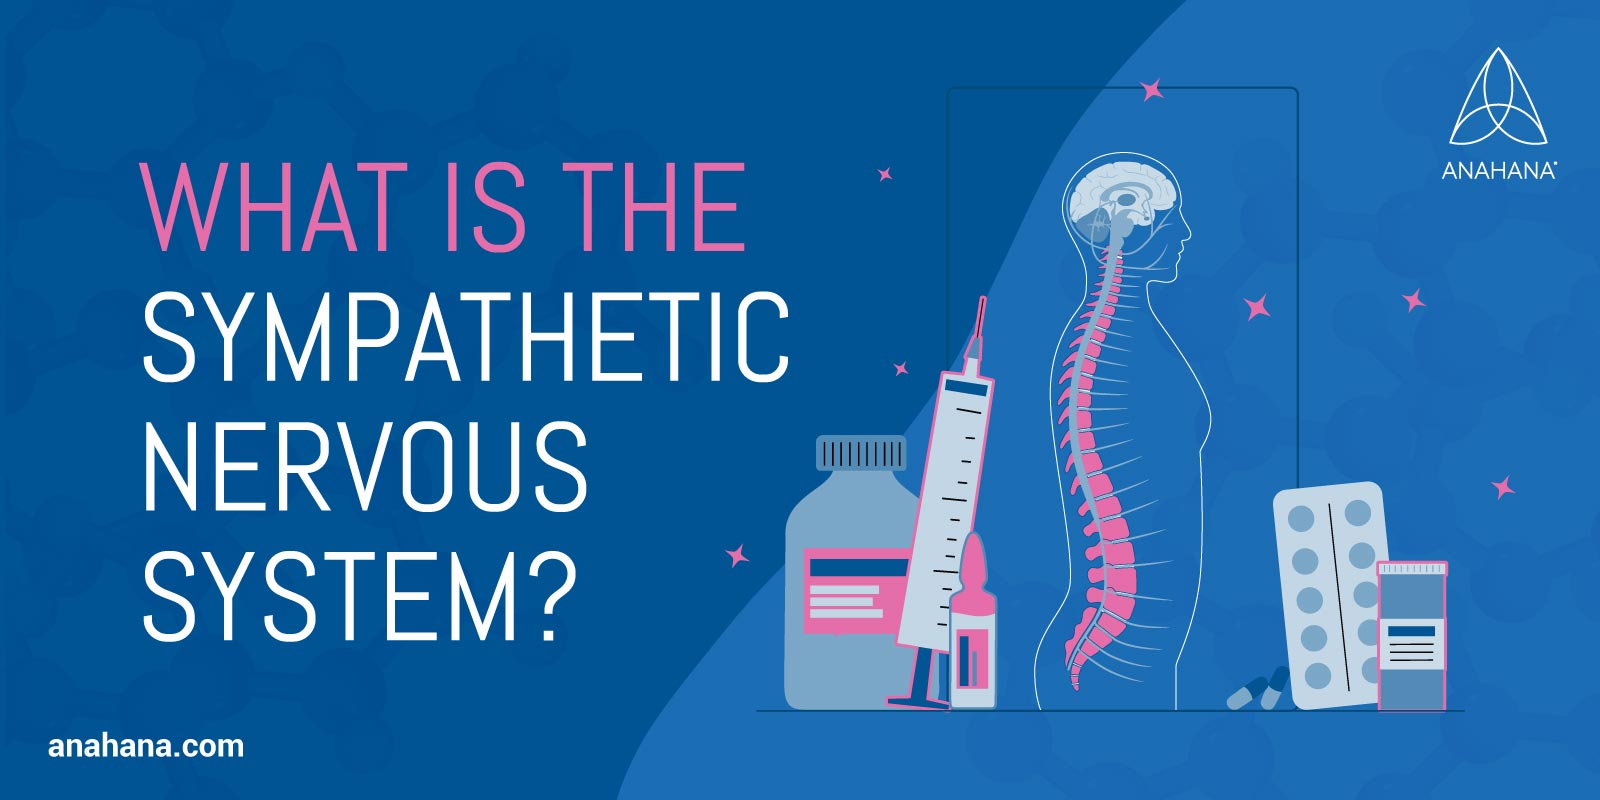 What is the Sympathetic Nervous System?